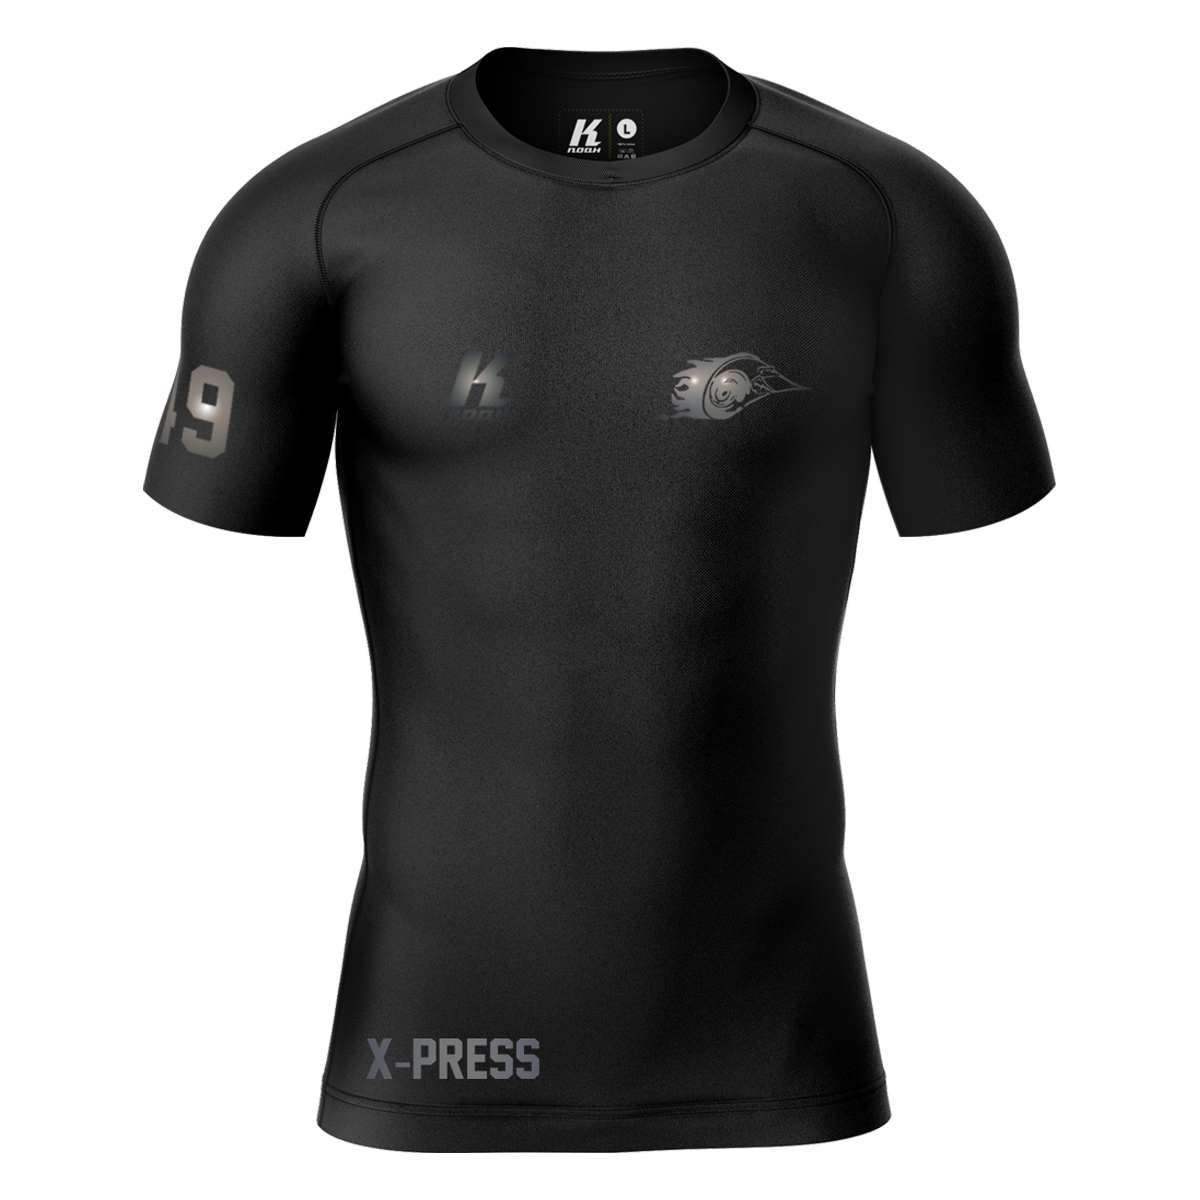 X-Press "Blackline" K.Tech Compression Shortsleeve Shirt with Playernumber/Initials